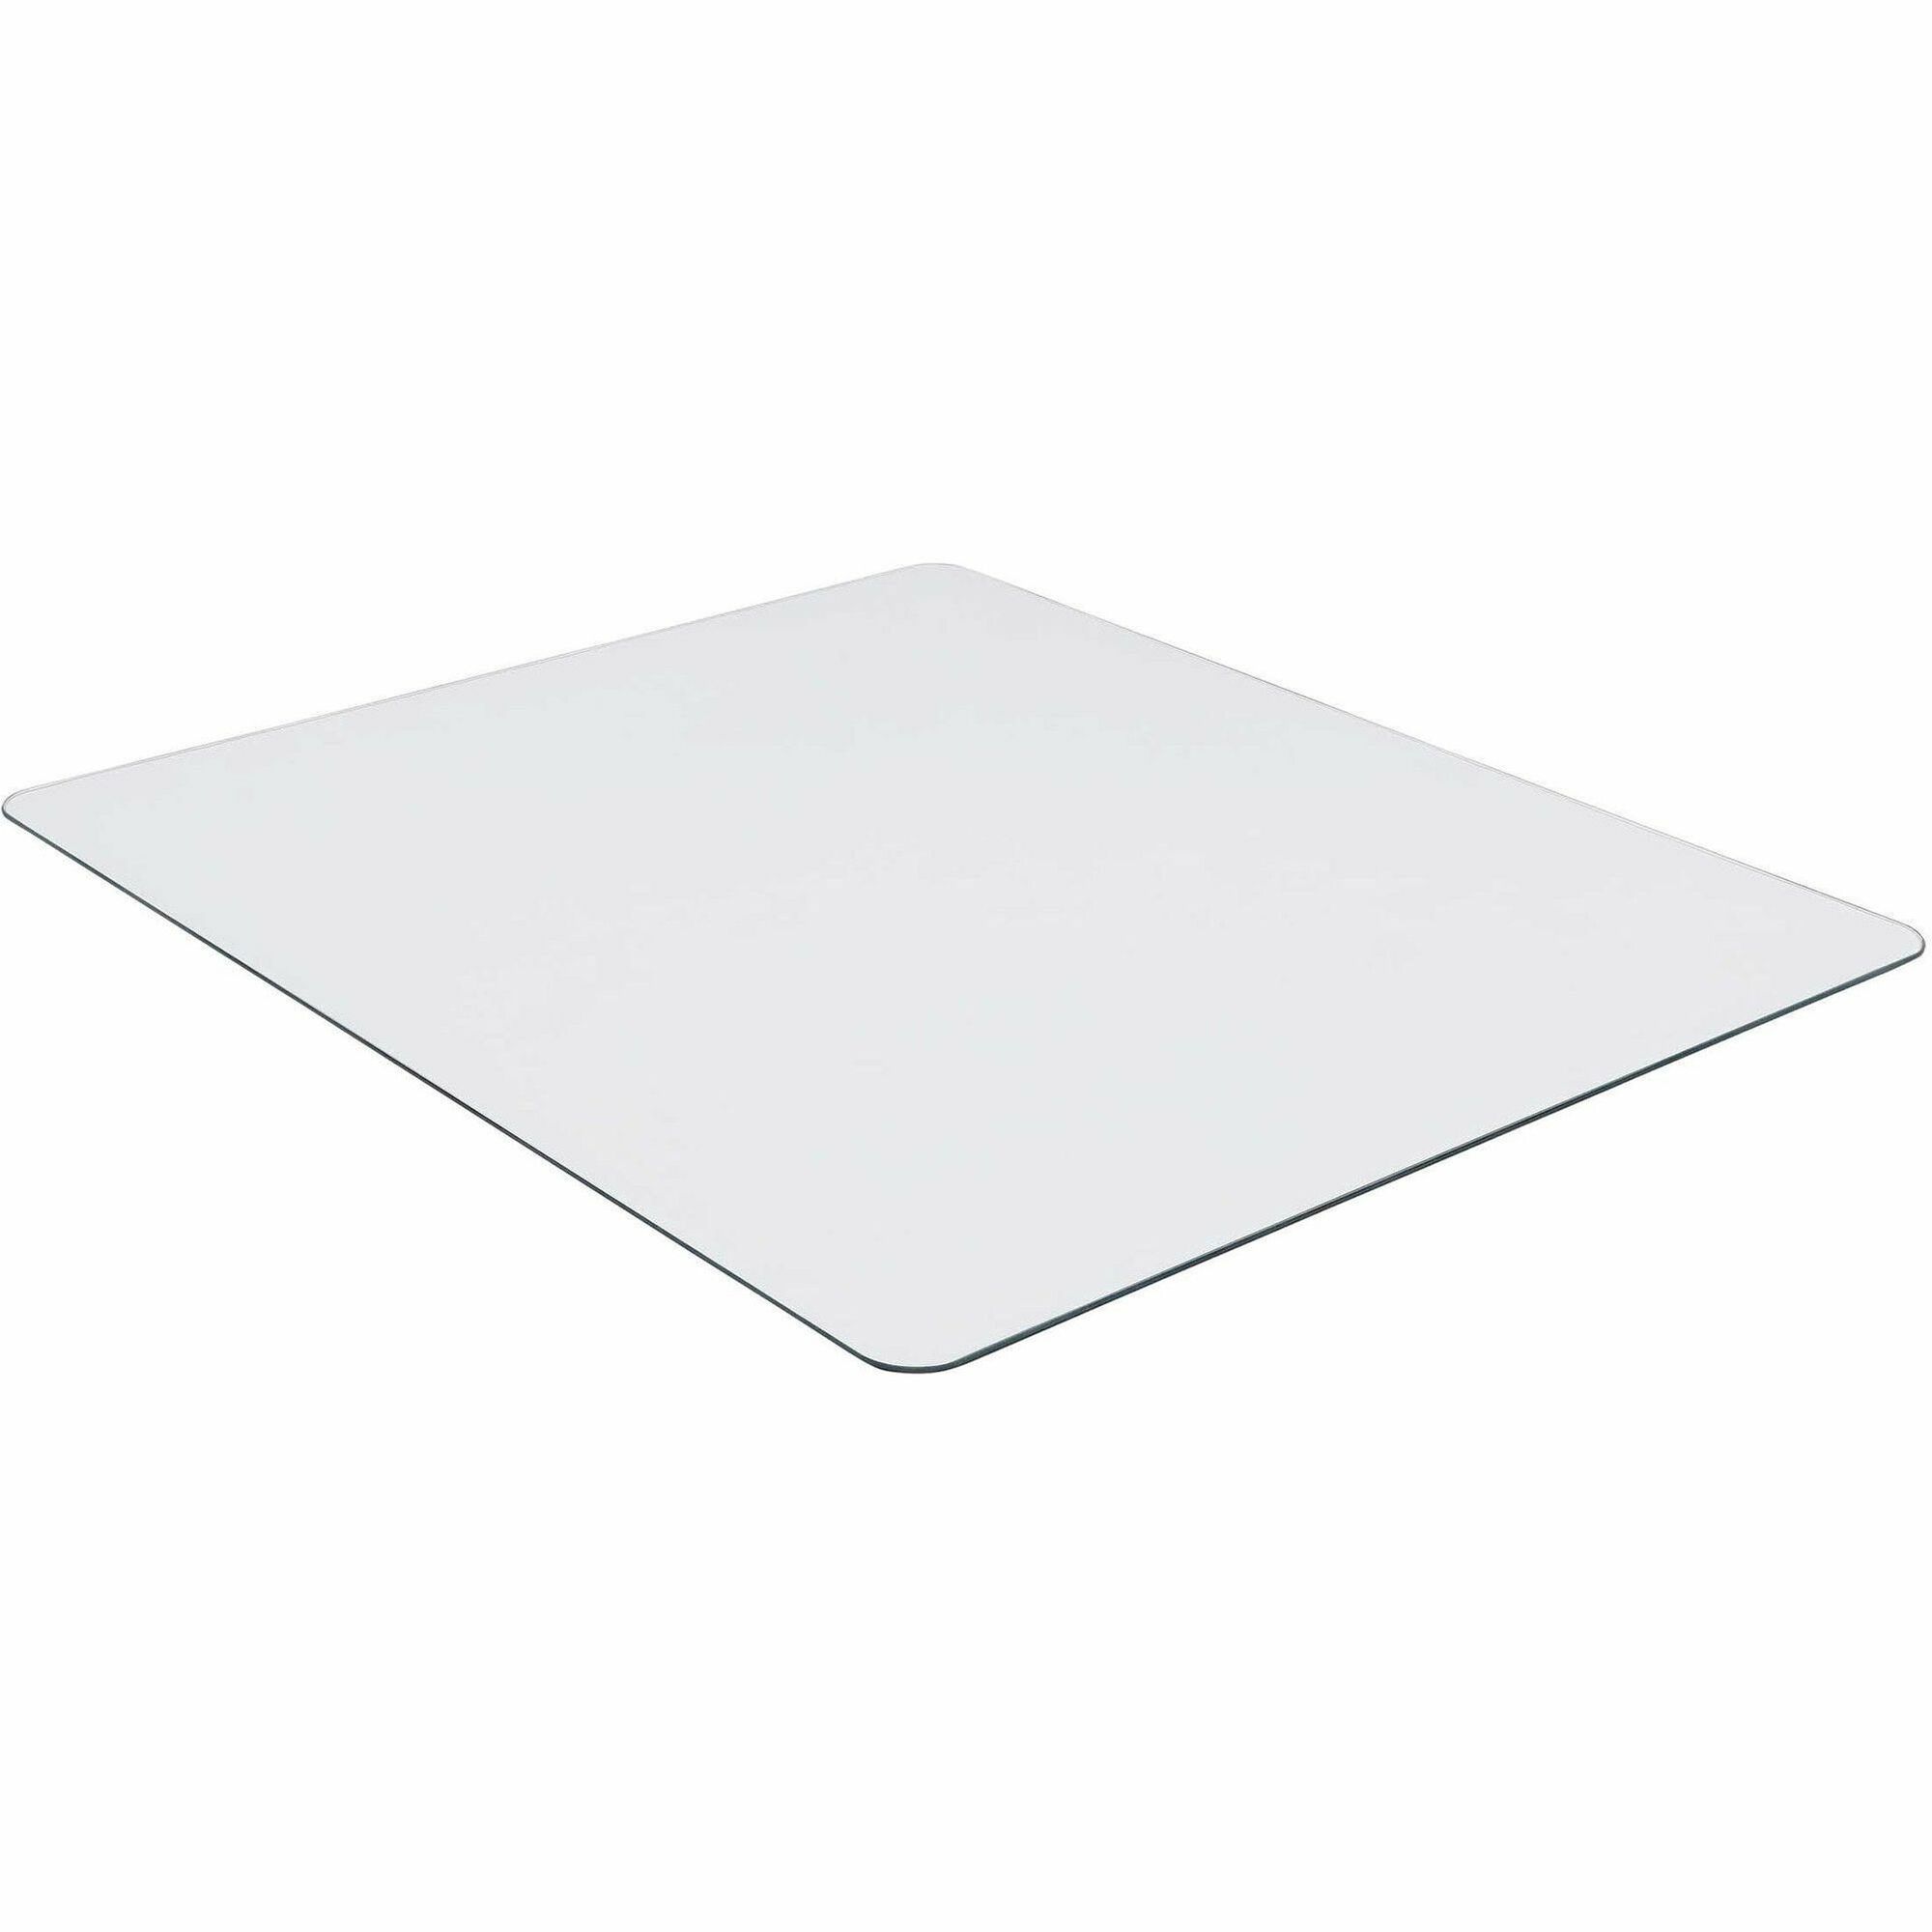 Lorell Tempered Glass Chairmat - Floor - 50 Length X 44 Width X 0.25 Thickness - Rectangle - Tempered Glass - Clear